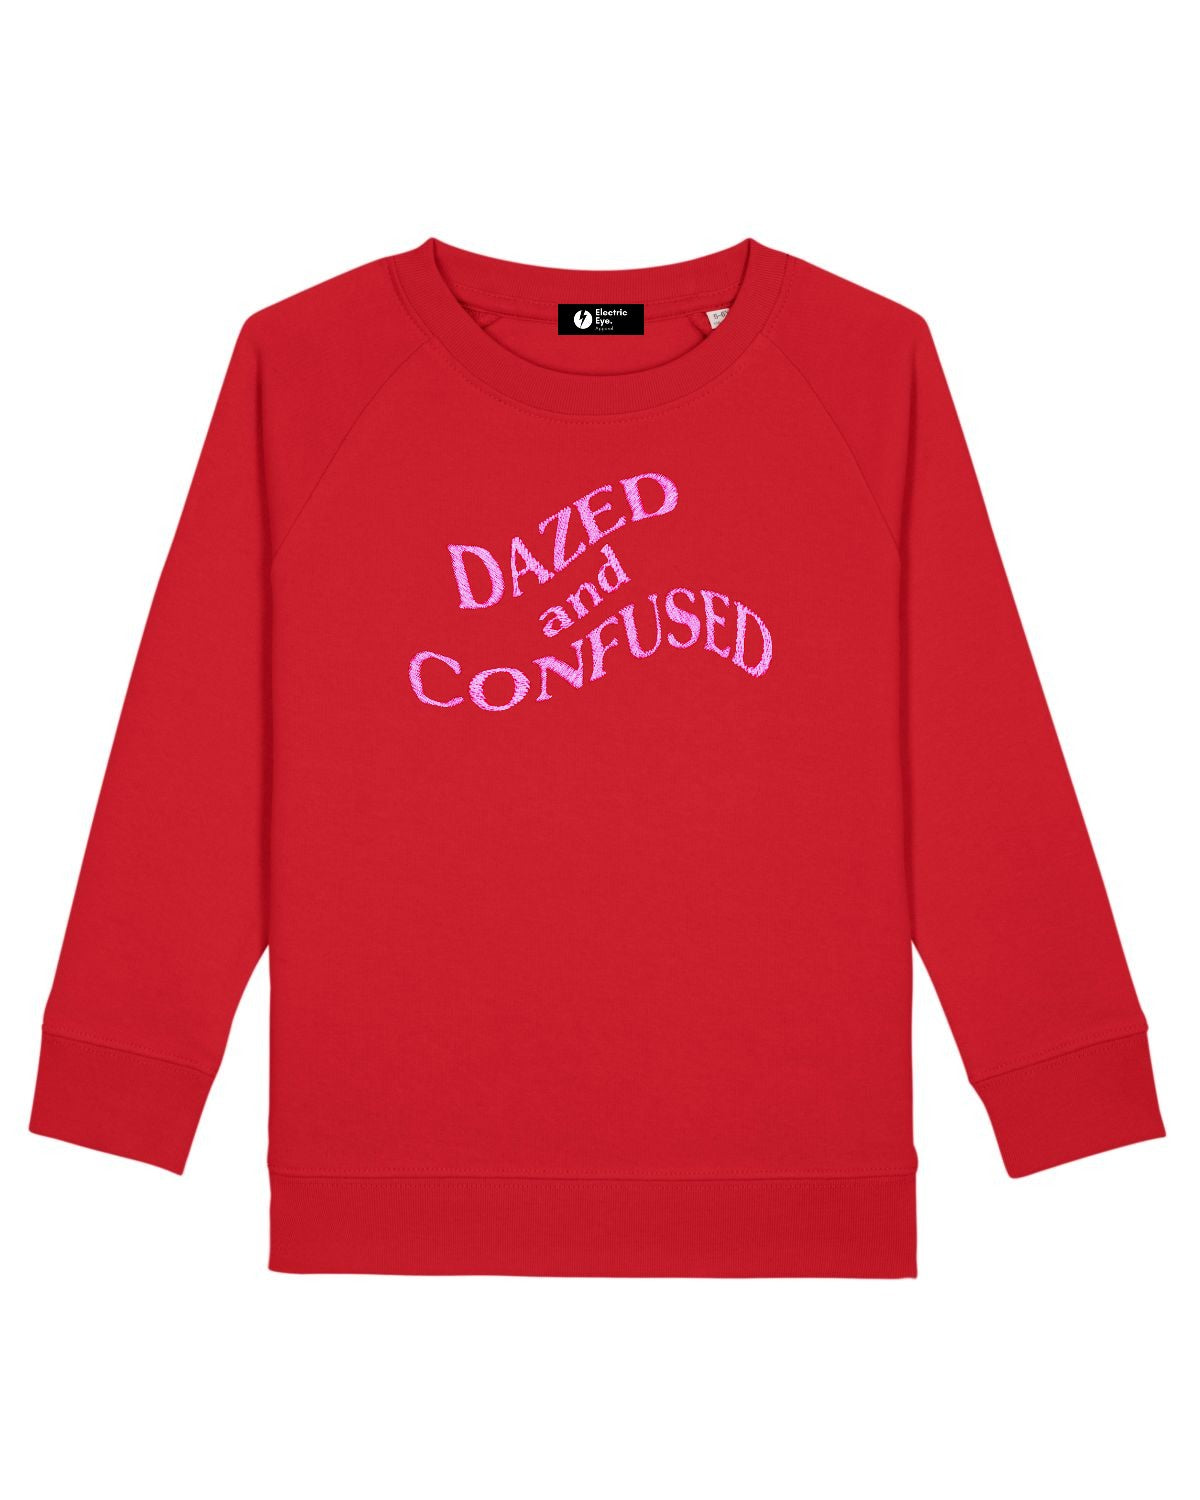 'DAZED AND CONFUSED' TRIPPY EMBROIDERED ORGANIC COTTON UNISEX CREW NECK 'ROLLER' SWEATSHIRT